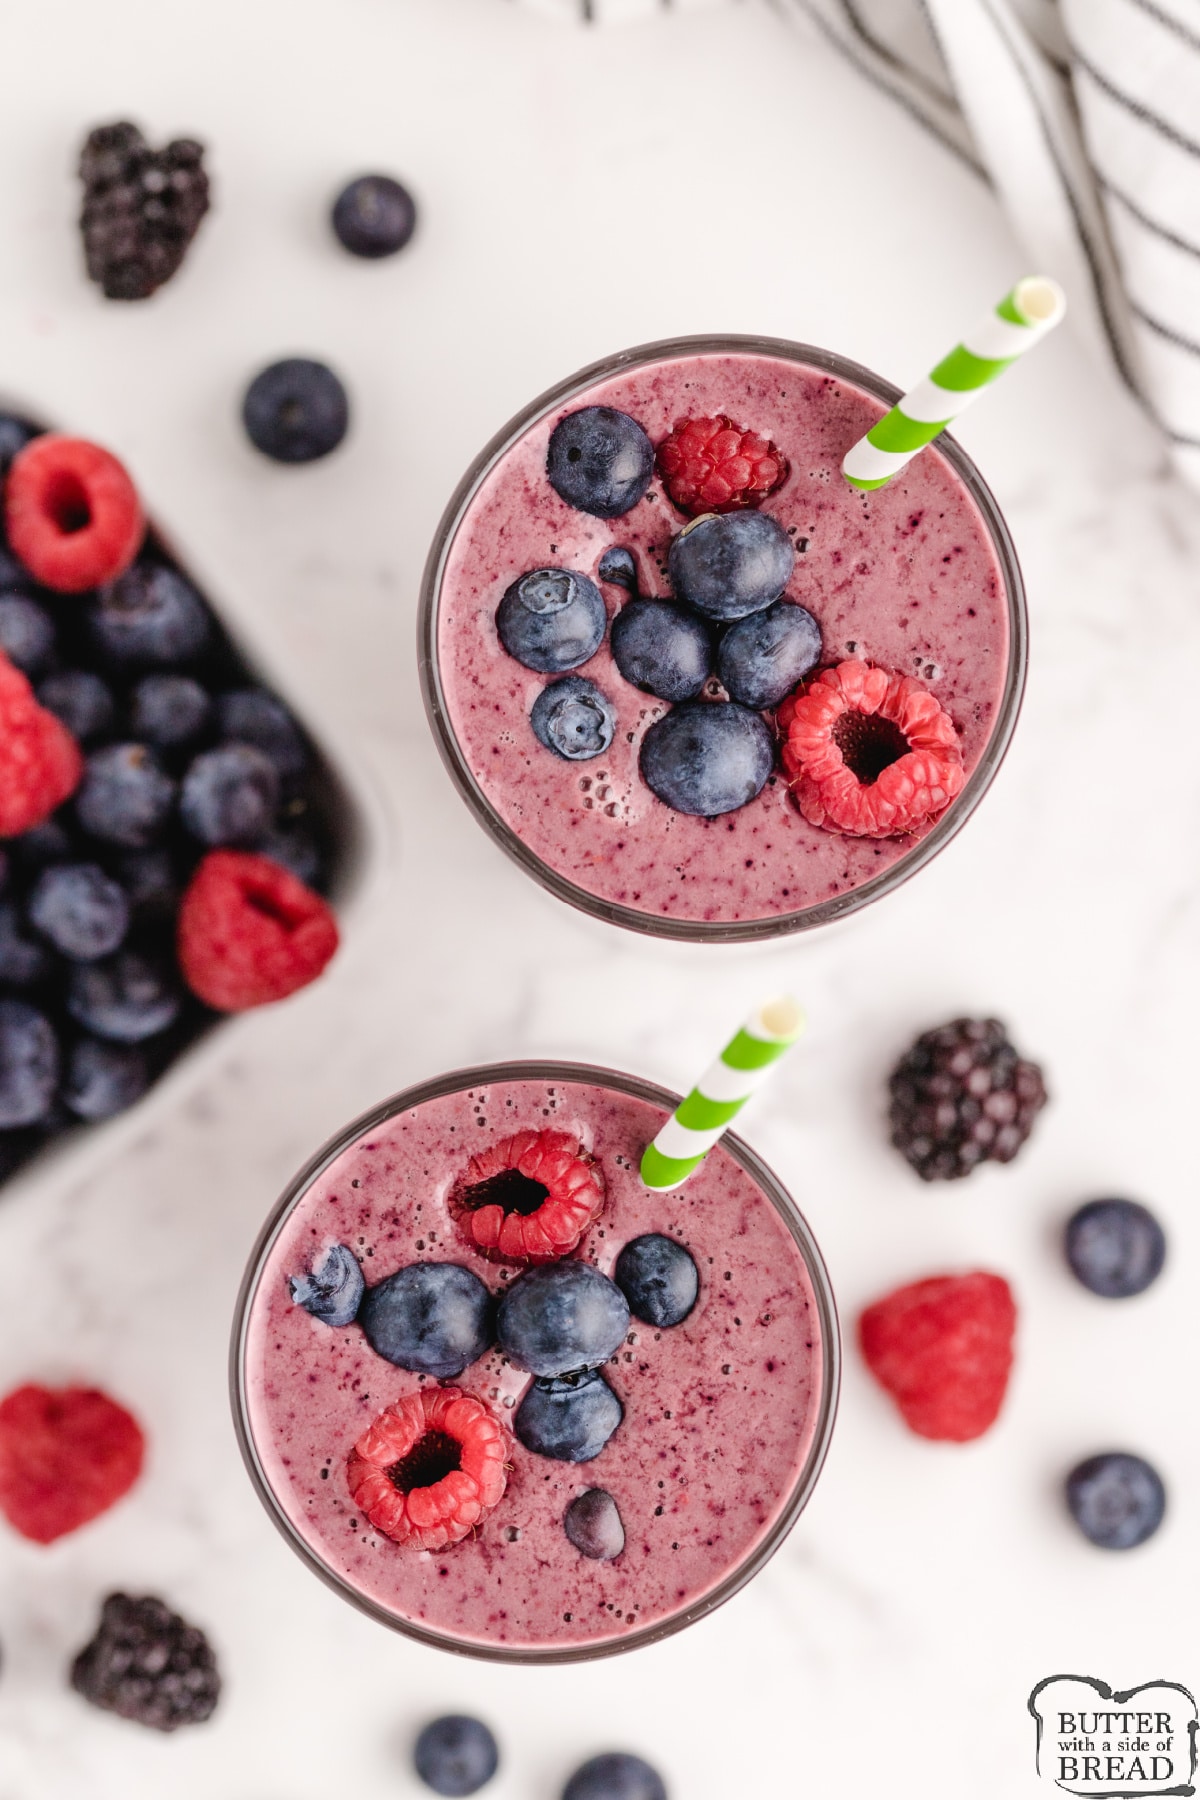 Simple smoothie recipe made with spinach and berries